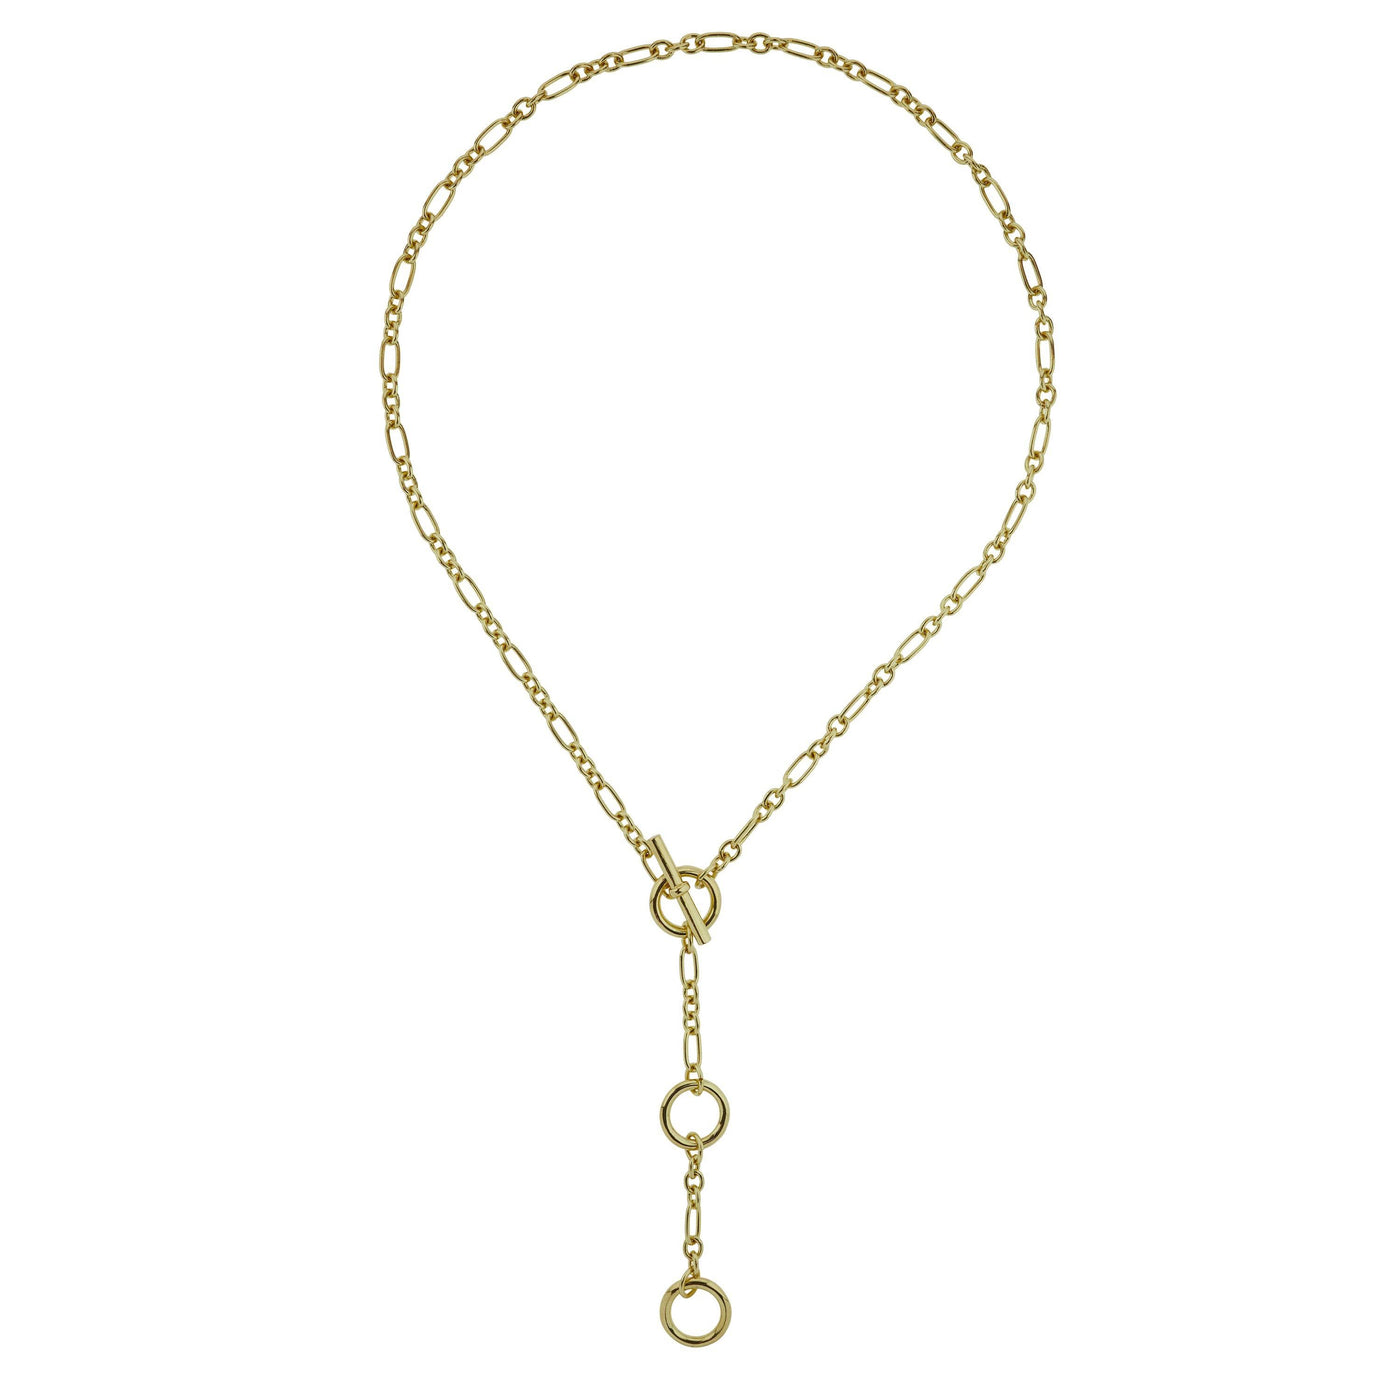 HEIDI DAUS®"Let's Connect" Chain Toggle Necklace